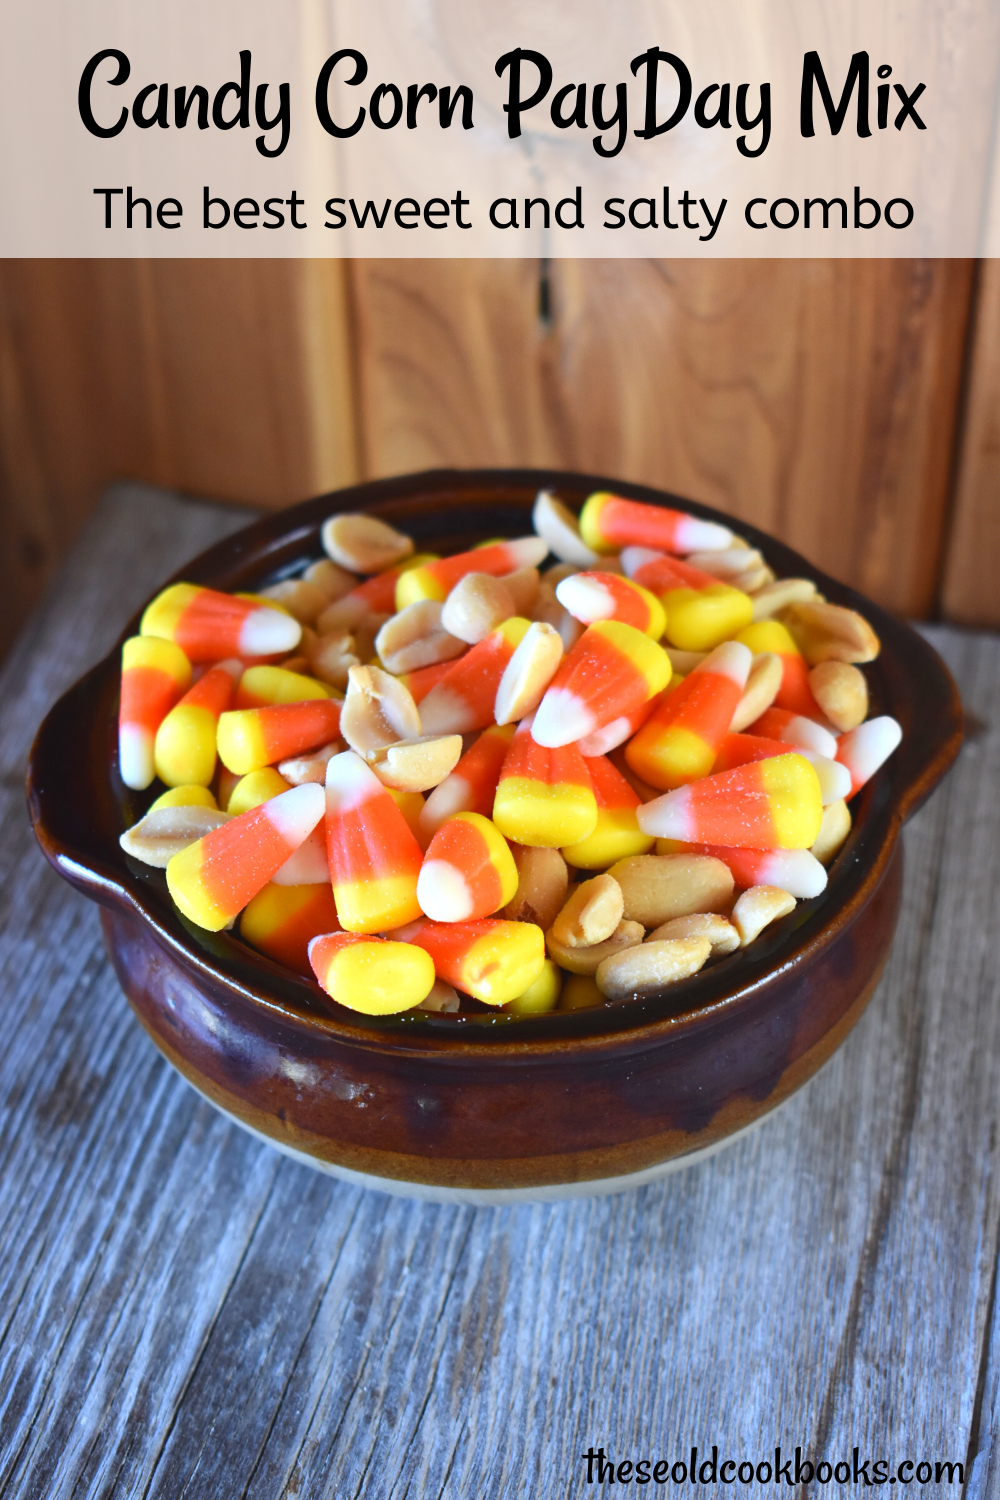 PayDay Snack Mix with Candy Corn and Peanuts